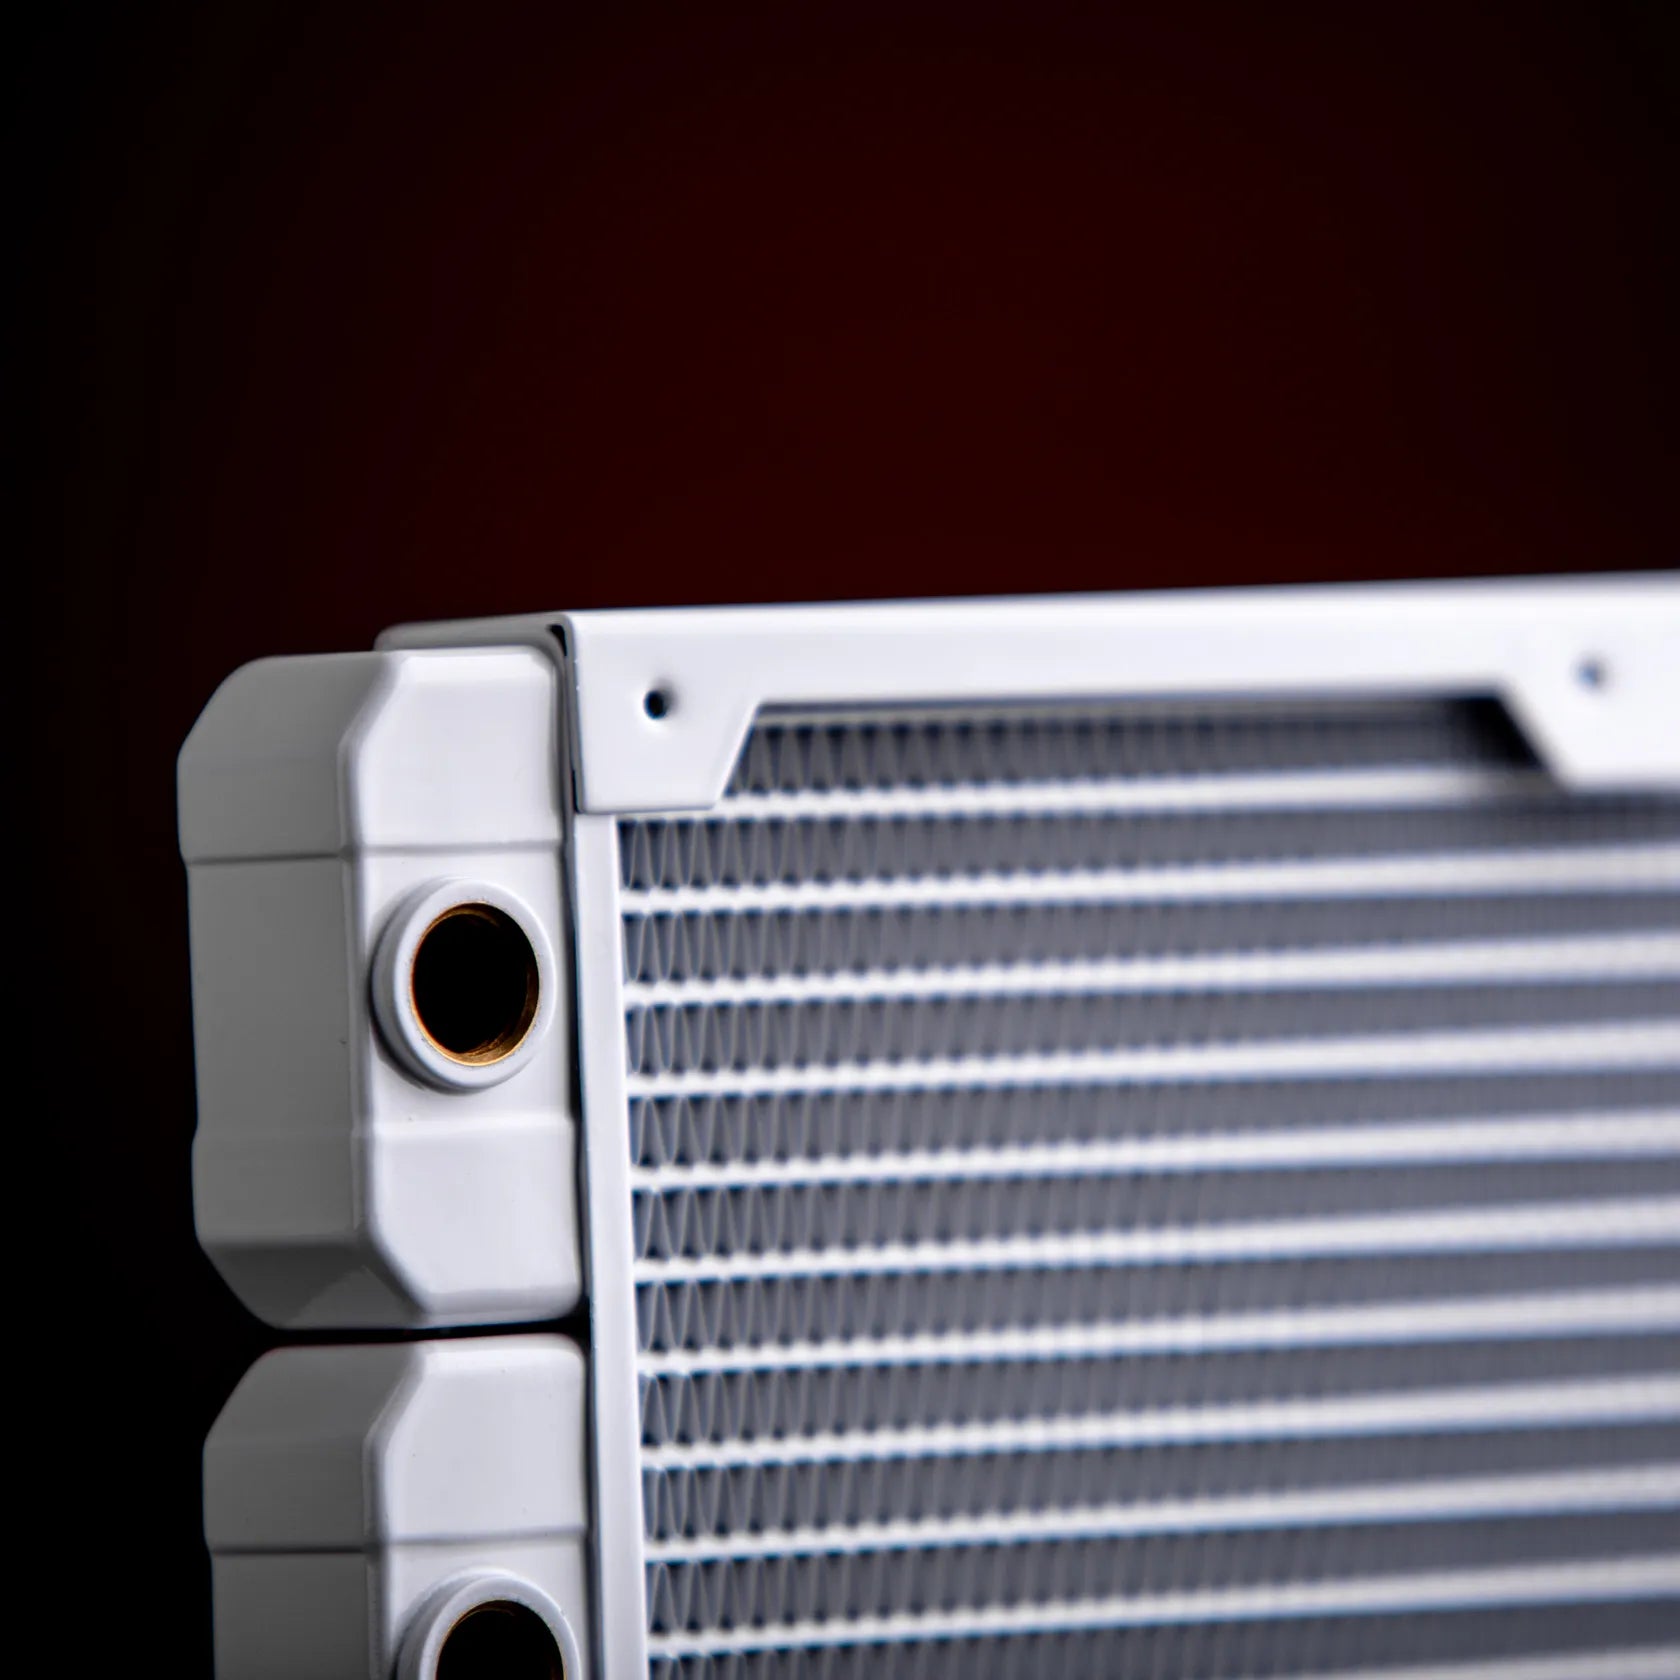 Freezemod SP240 - 240mm Copper Water Cooling Radiator - White Ordinary Cooling Gear